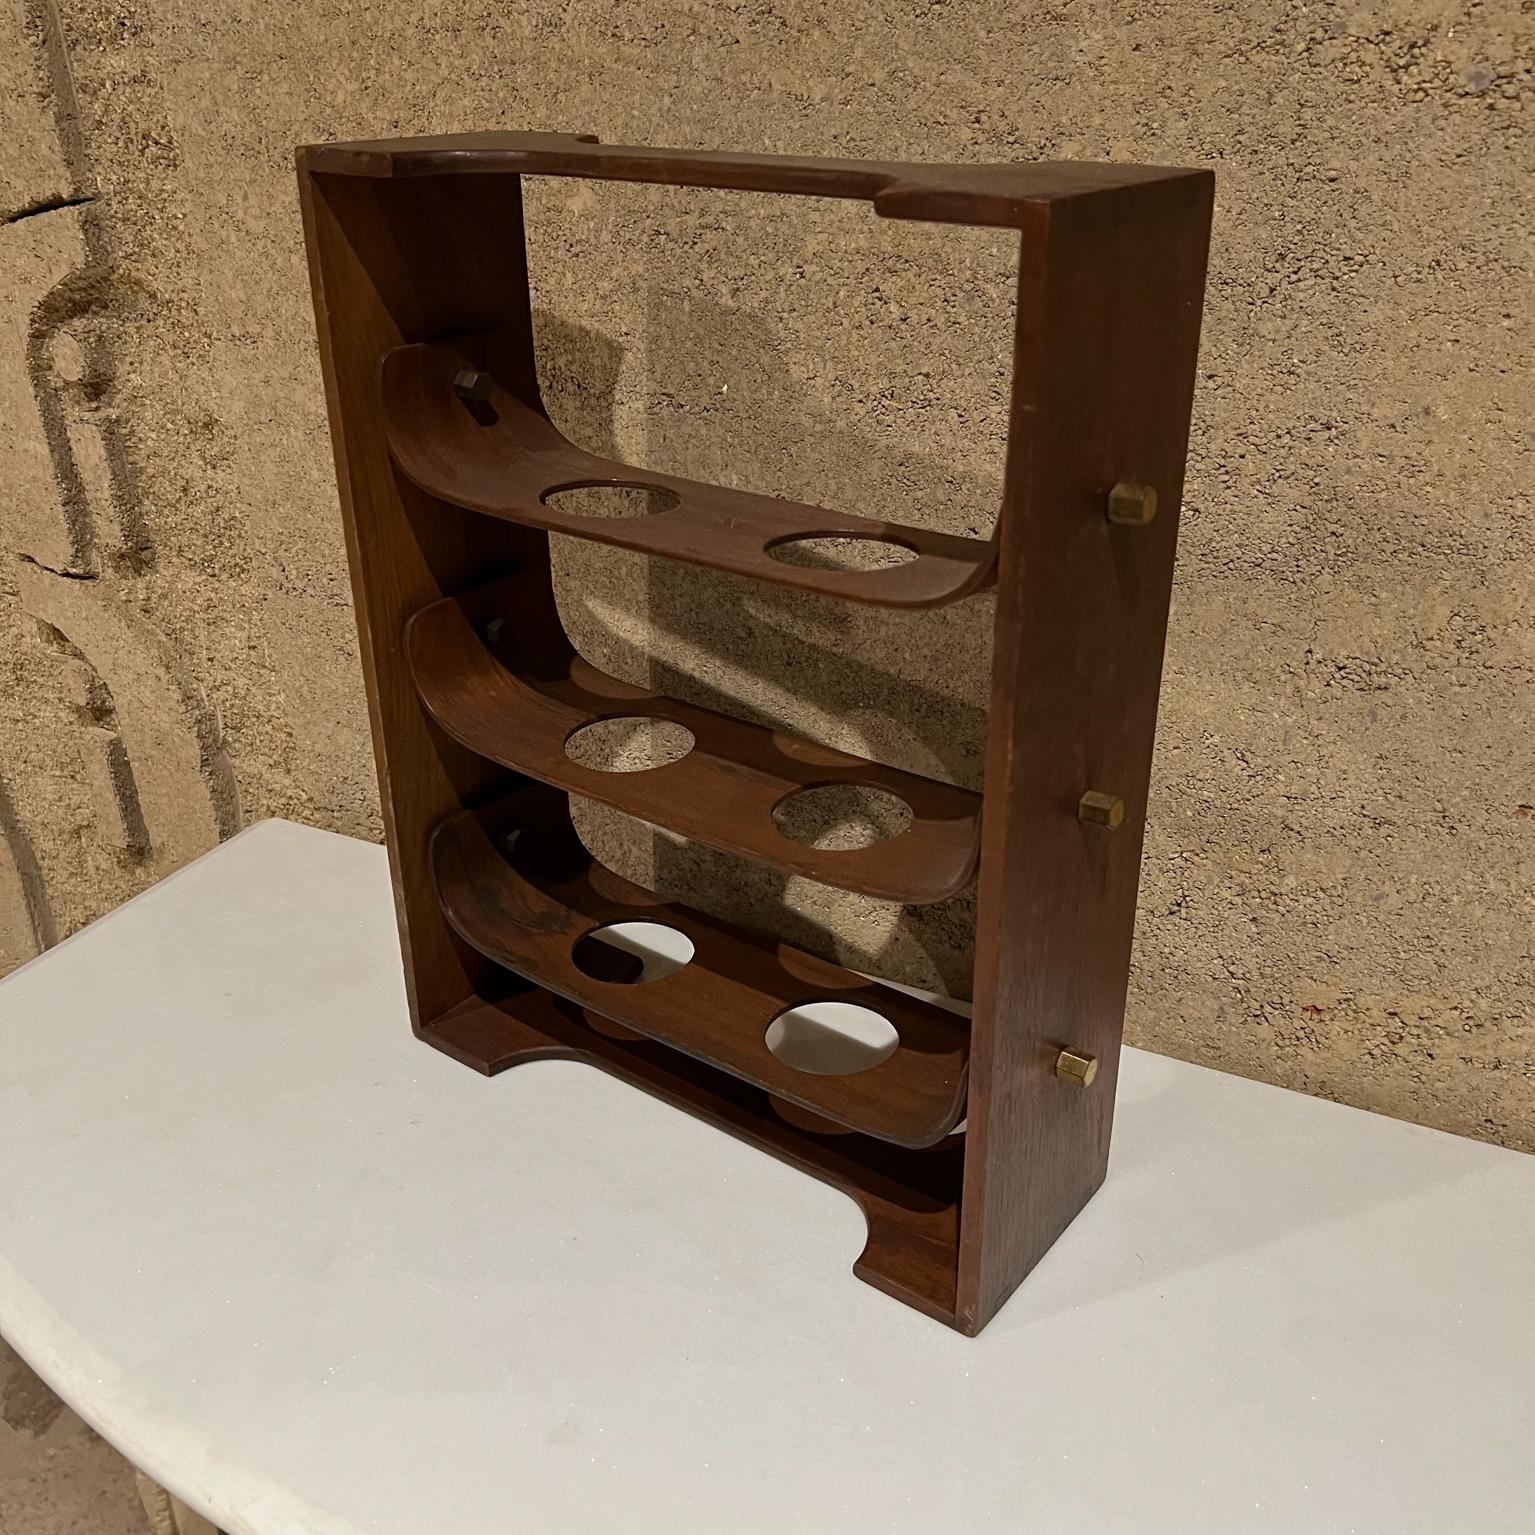 1970s Sculptural Modern Wood Tray Valet Serving Caddy for Drink Service 2